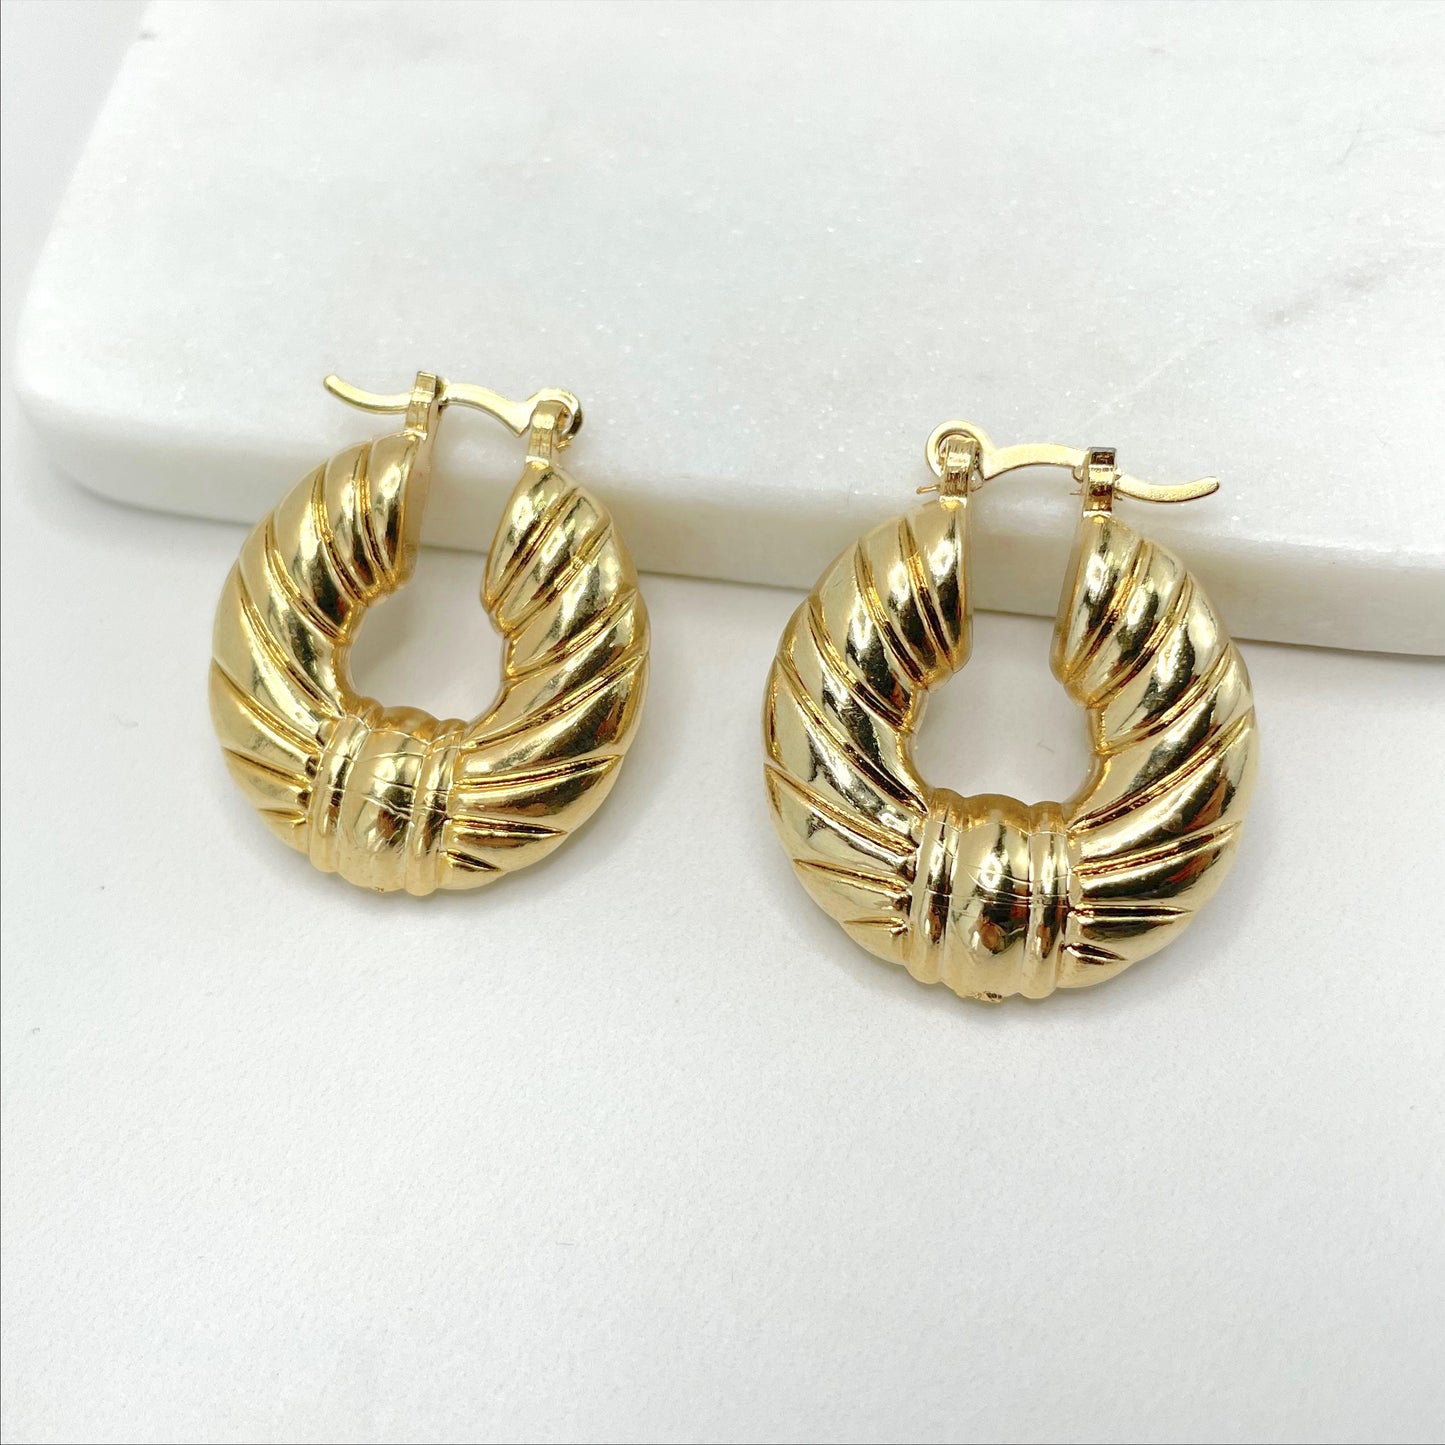 18k Gold Filled Twisted Hoops Earrings, Ribbon Bow Shape, Ultra Light, Wholesale Jewelry Making Supplies